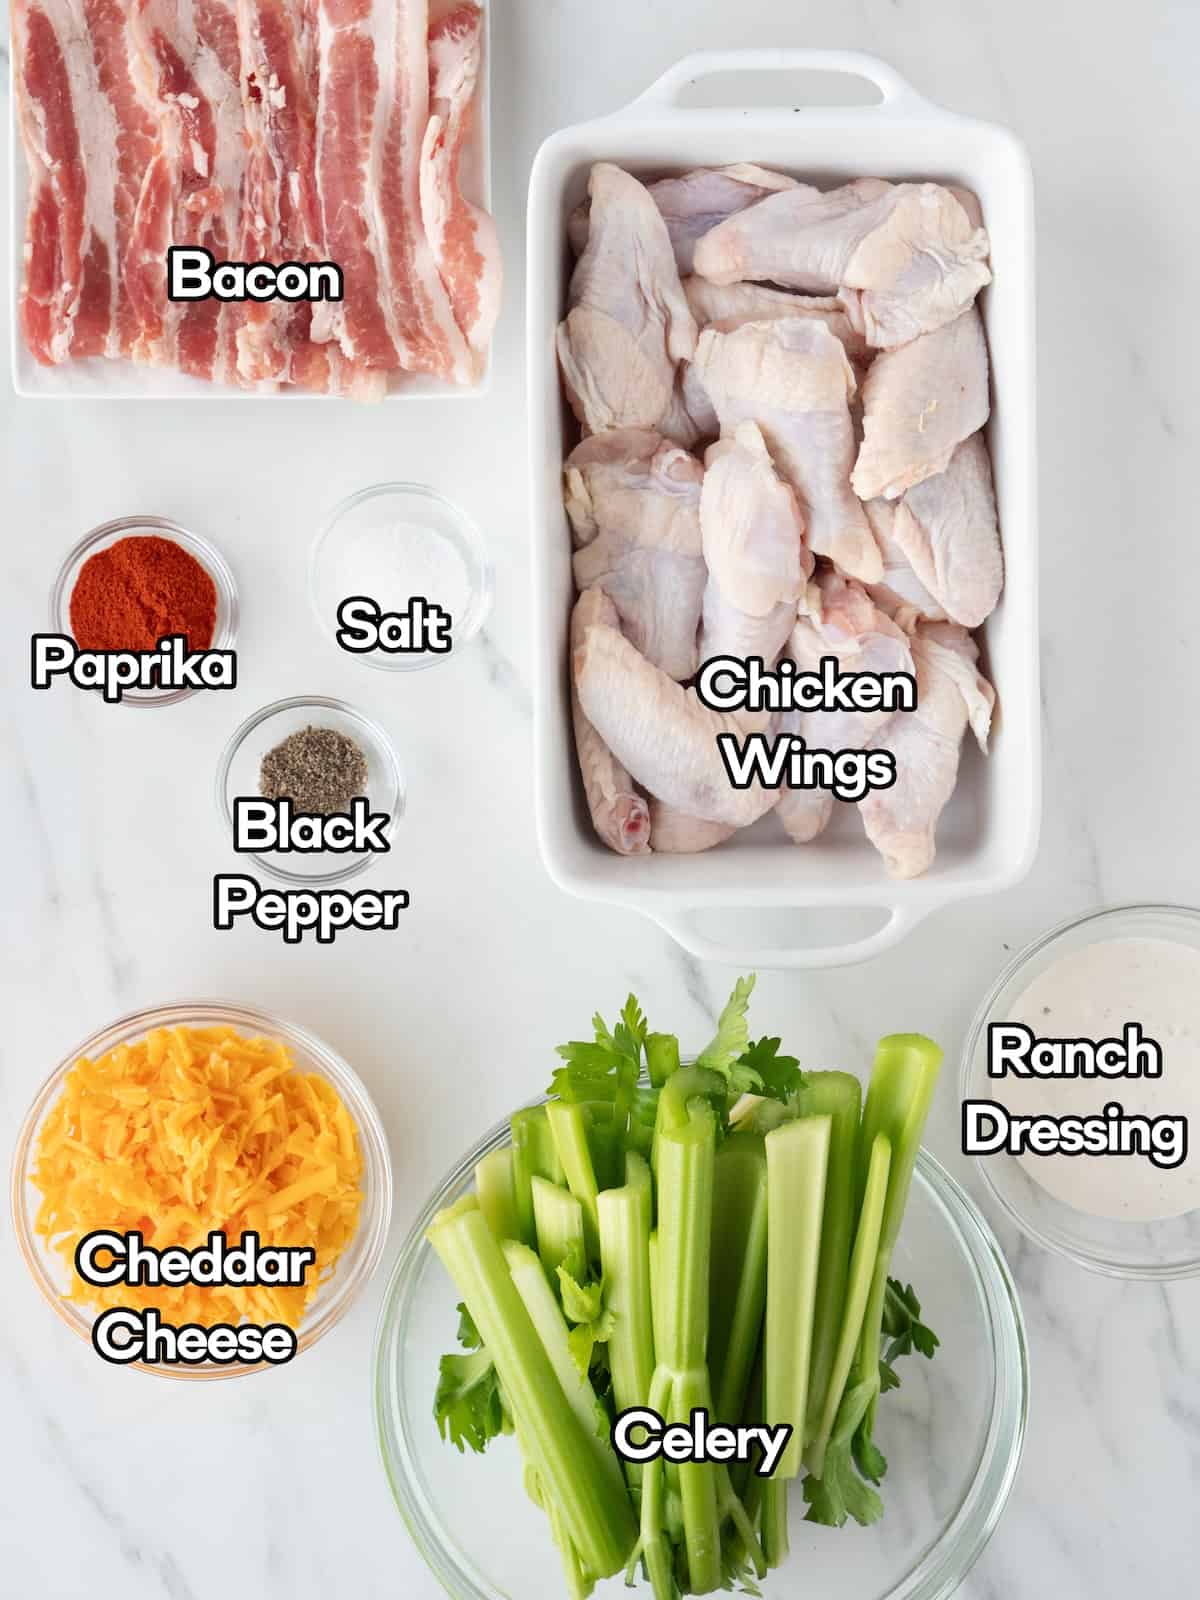 Mise-en-place of all the ingredients required to make bacon cheddar chicken wings.